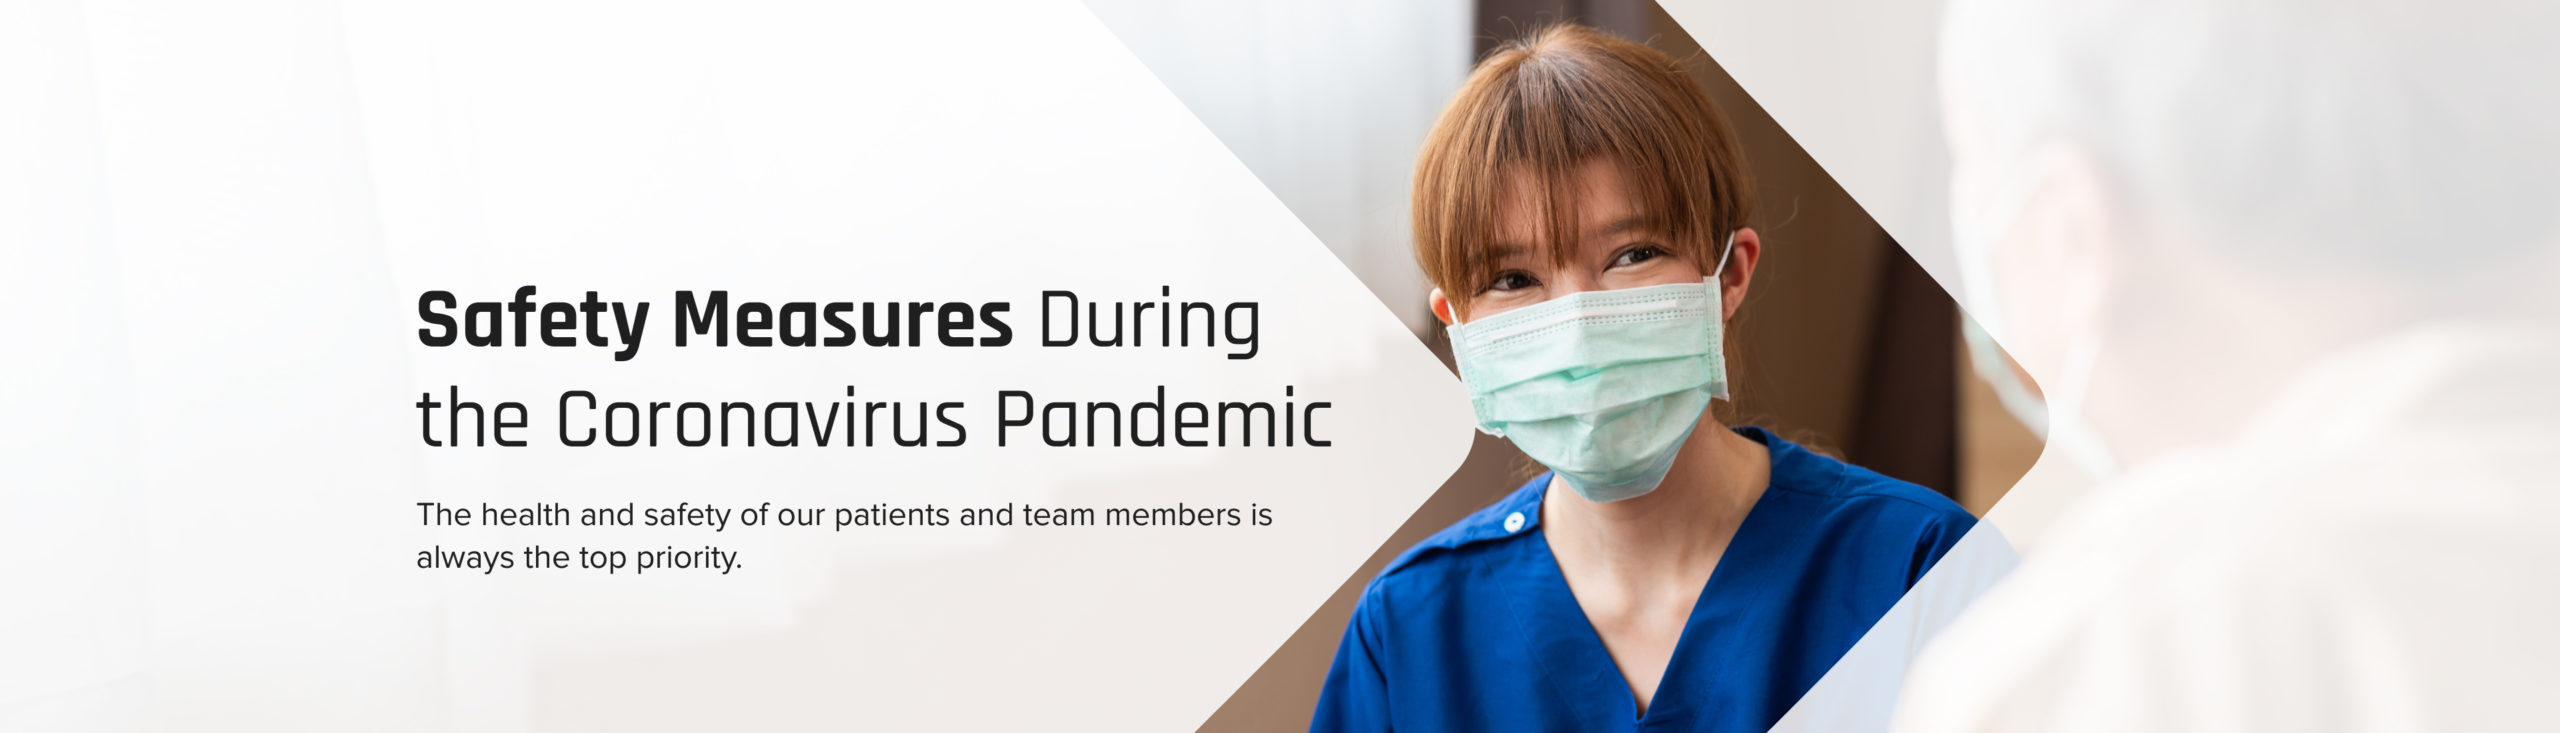 Safety Measures during the Coronavirus Pandemic